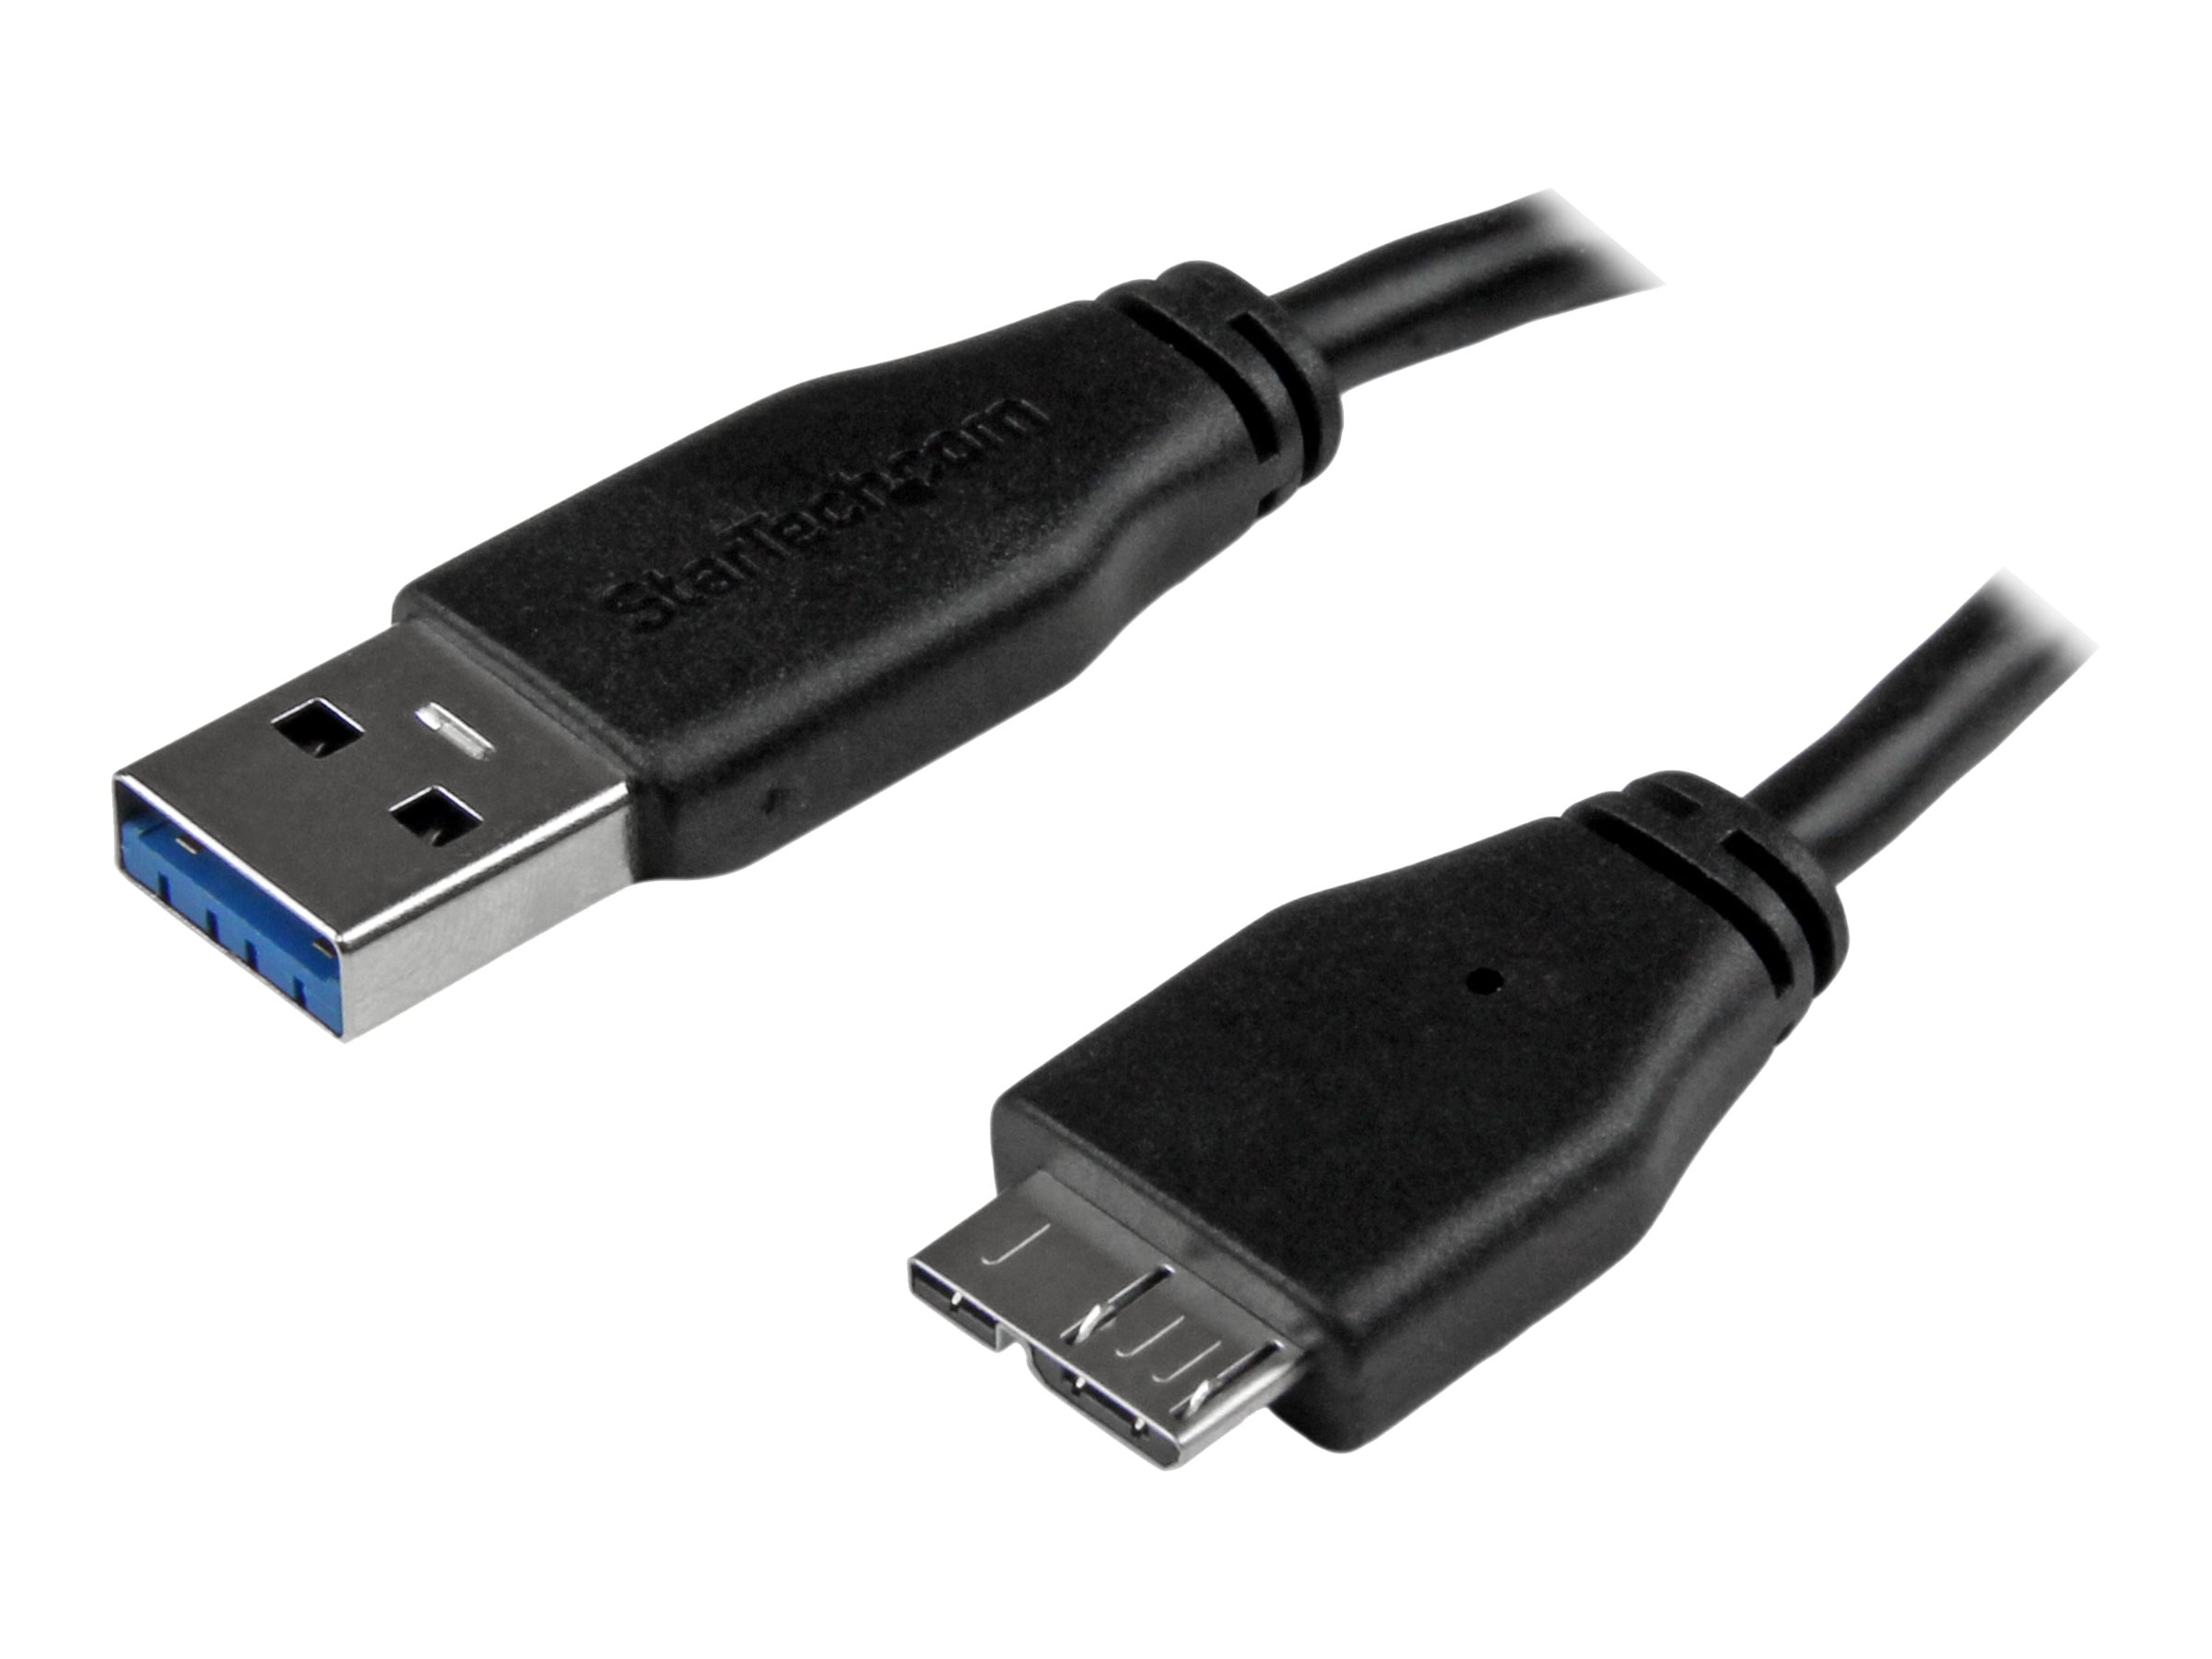 StarTech.com 0.5m 20in Slim USB 3.0 A to Micro B Cable M/M